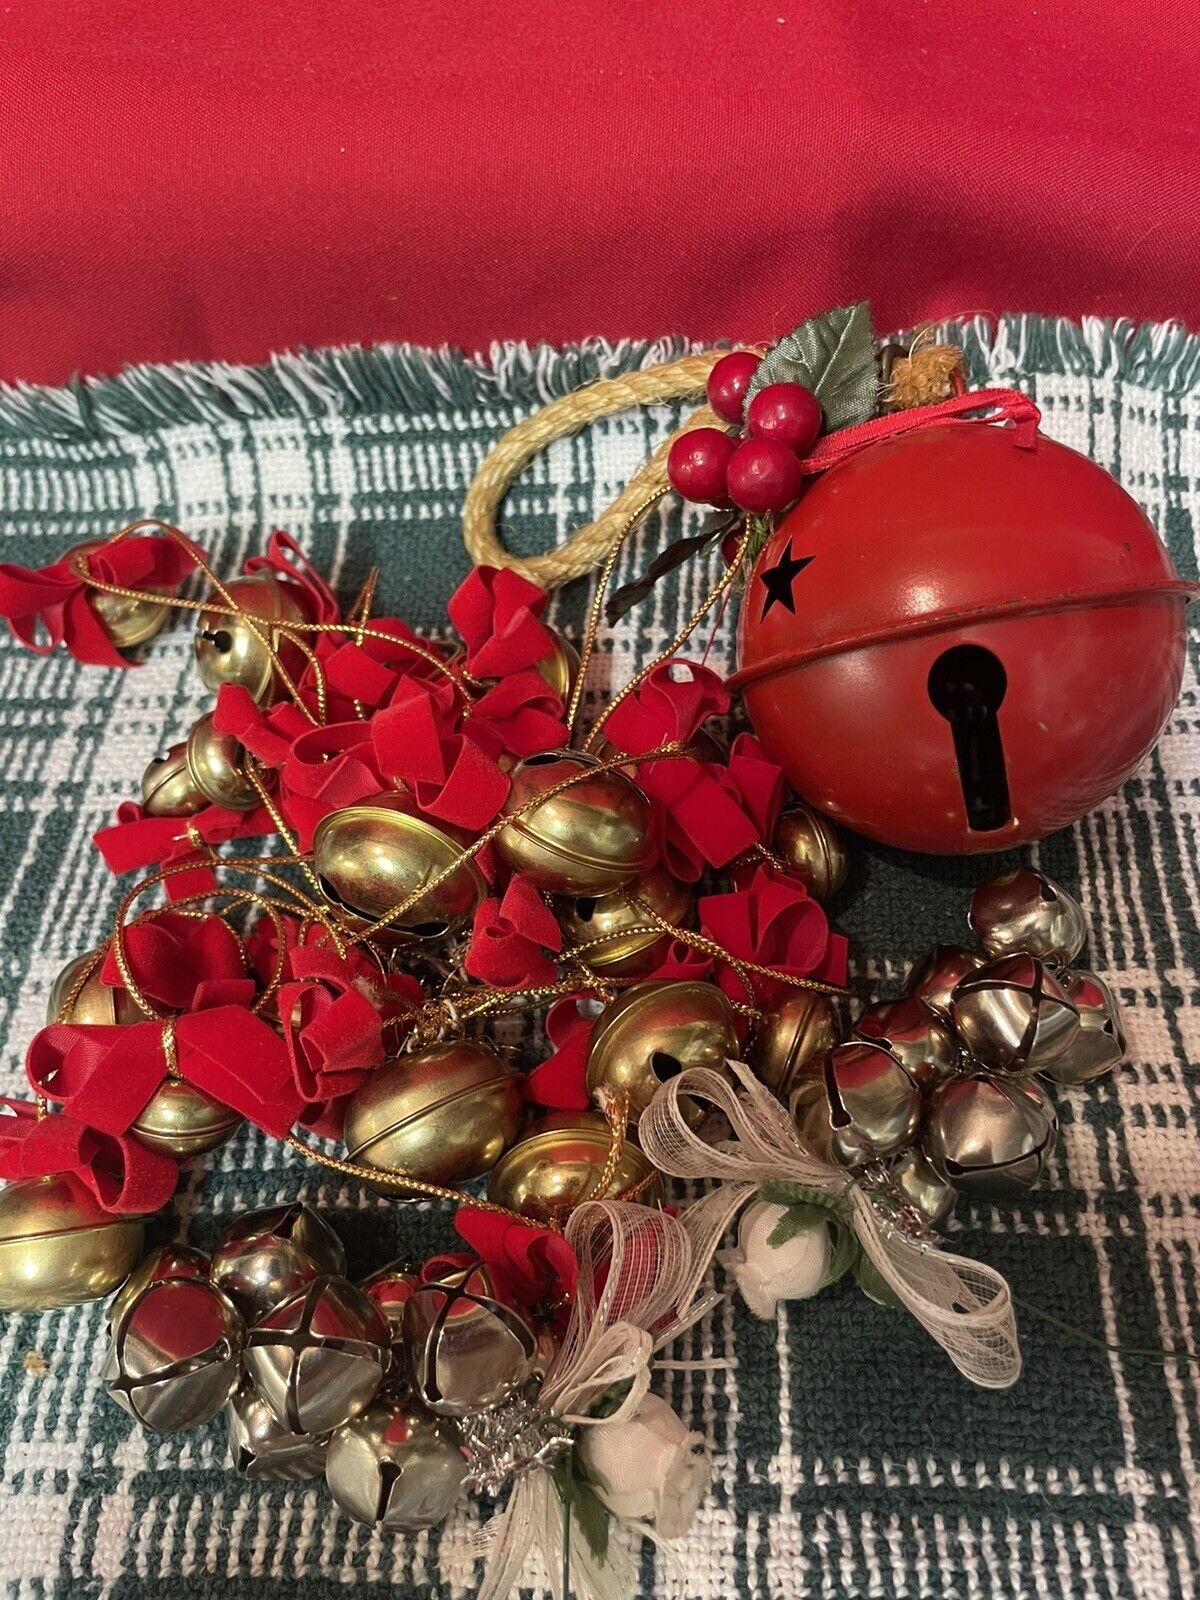 Lot of 39 Jingle Bell Ornaments with Red Ribbon Bows Various Sizes.